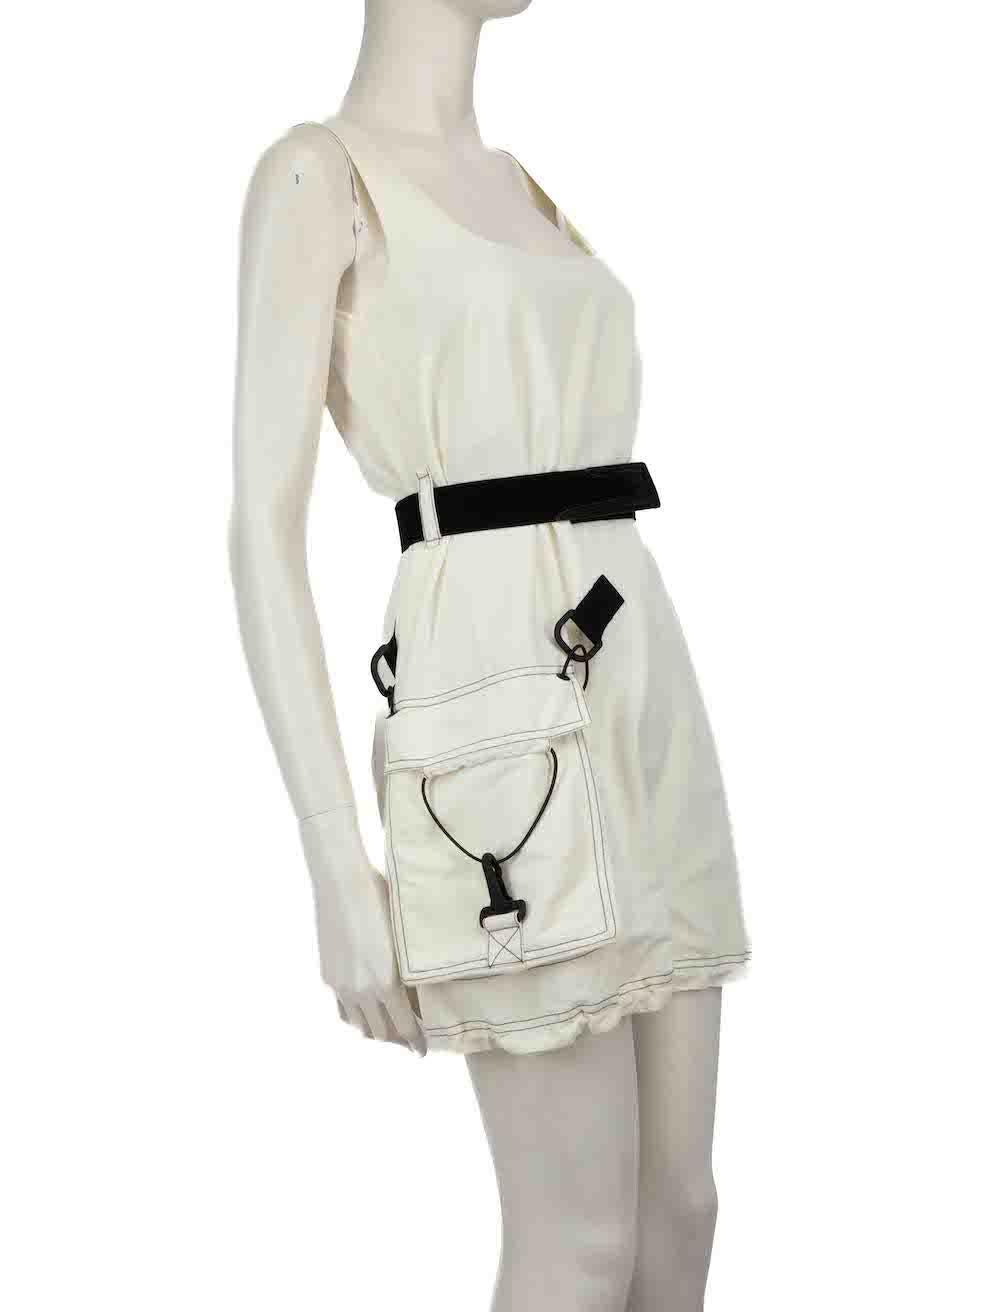 CONDITION is Never worn, with tags. No visible wear to dress is evident on this new Stella McCartney designer resale item.
 
 
 
 Details
 
 
 White
 
 Synthetic
 
 Dress
 
 Mini
 
 Sleeveless
 
 Square neck
 
 Belted
 
 Drawstring hem
 
 1x Front